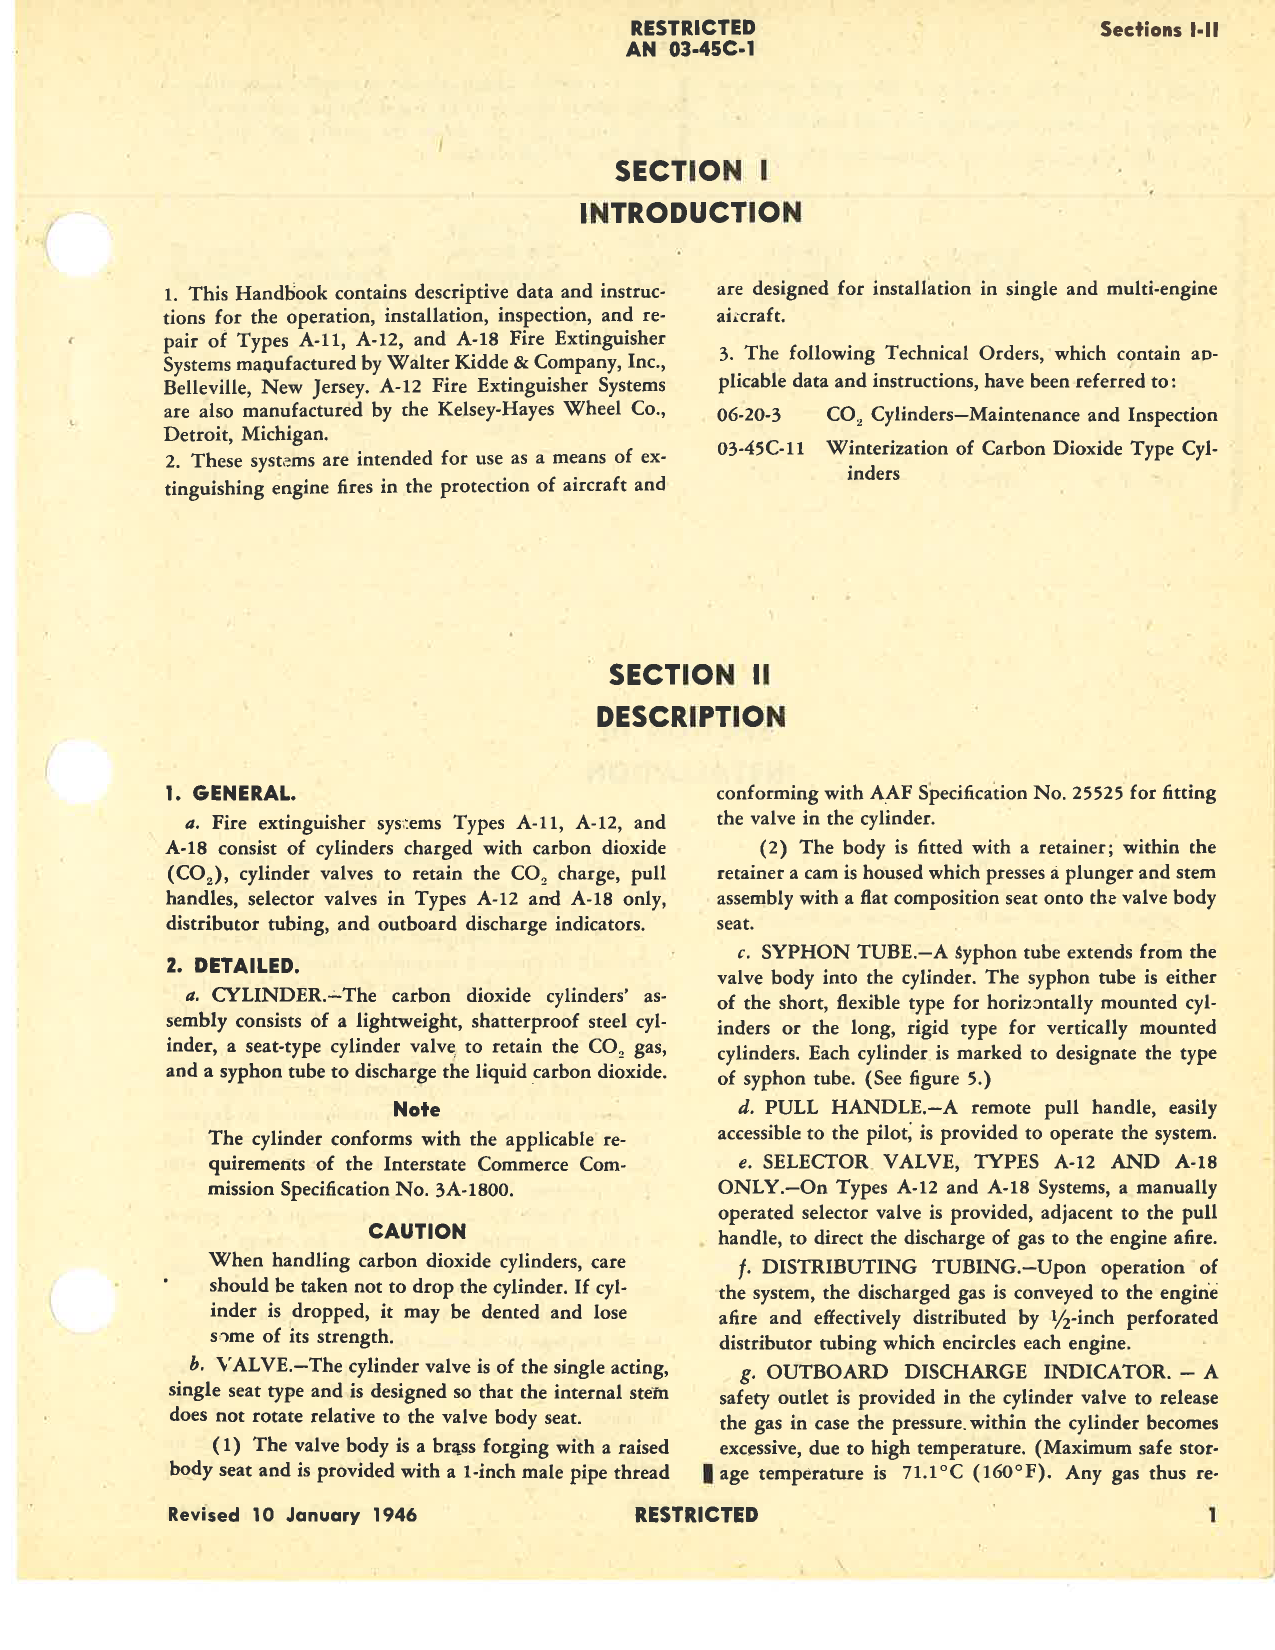 Sample page 5 from AirCorps Library document: Operation, Service, & Overhaul Instructions with Parts Catalog for Aircraft Fire Extinguisher Systems A-11, -12, and -18